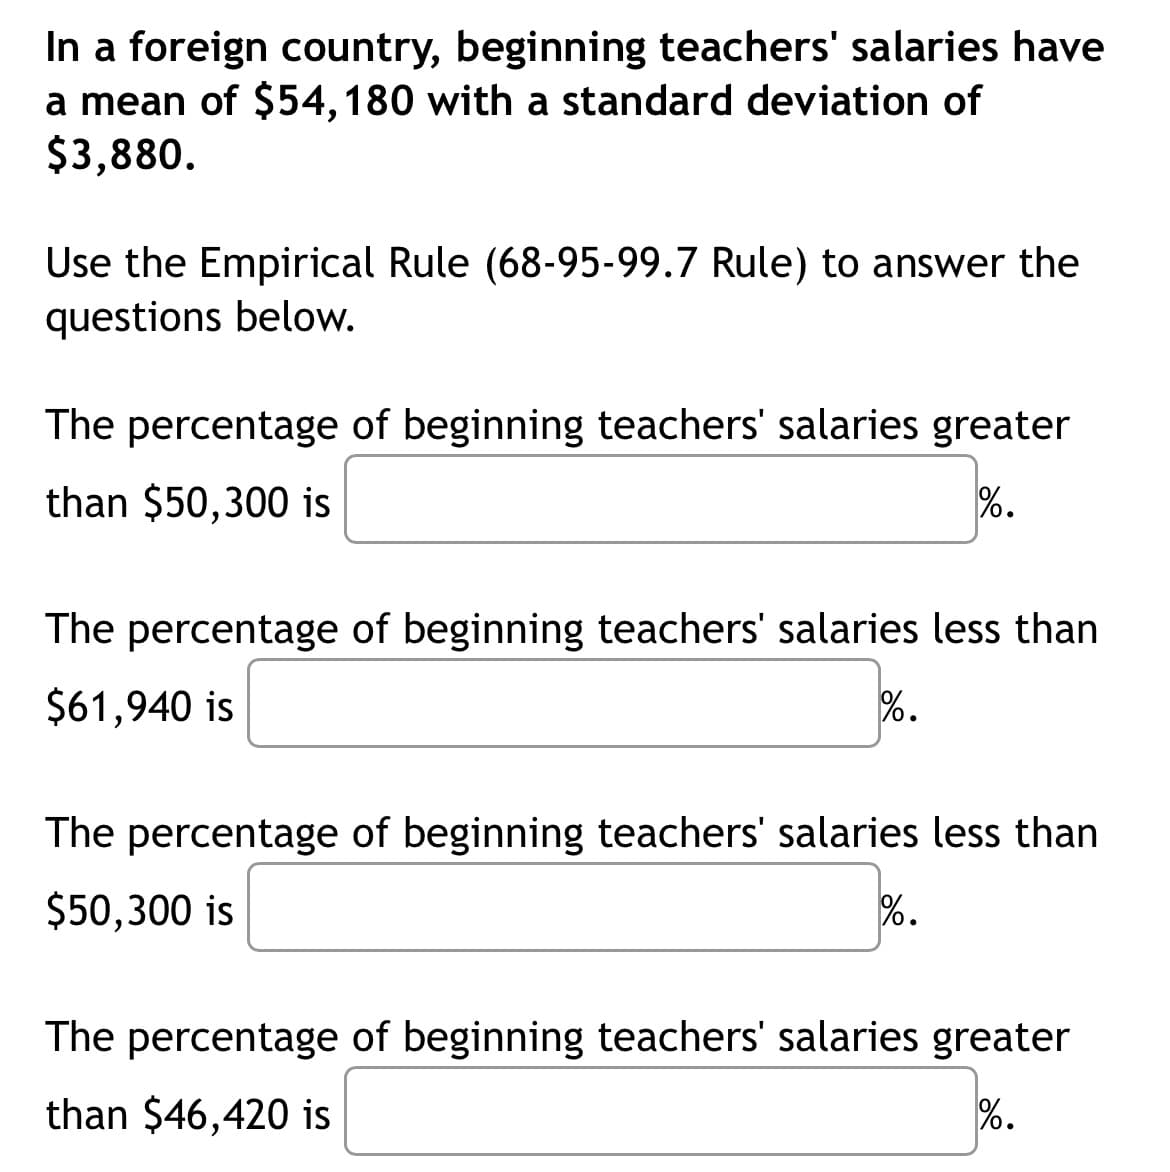 In a foreign country, beginning teachers' salaries have
a mean of $54, 180 with a standard deviation of
$3,880.
Use the Empirical Rule (68-95-99.7 Rule) to answer the
questions below.
The percentage of beginning teachers' salaries greater
than $50,300 is
%.
The percentage of beginning teachers' salaries less than
$61,940 is
%.
The percentage of beginning teachers' salaries less than
$50,300 is
%.
The percentage of beginning teachers' salaries greater
than $46,420 is
%.